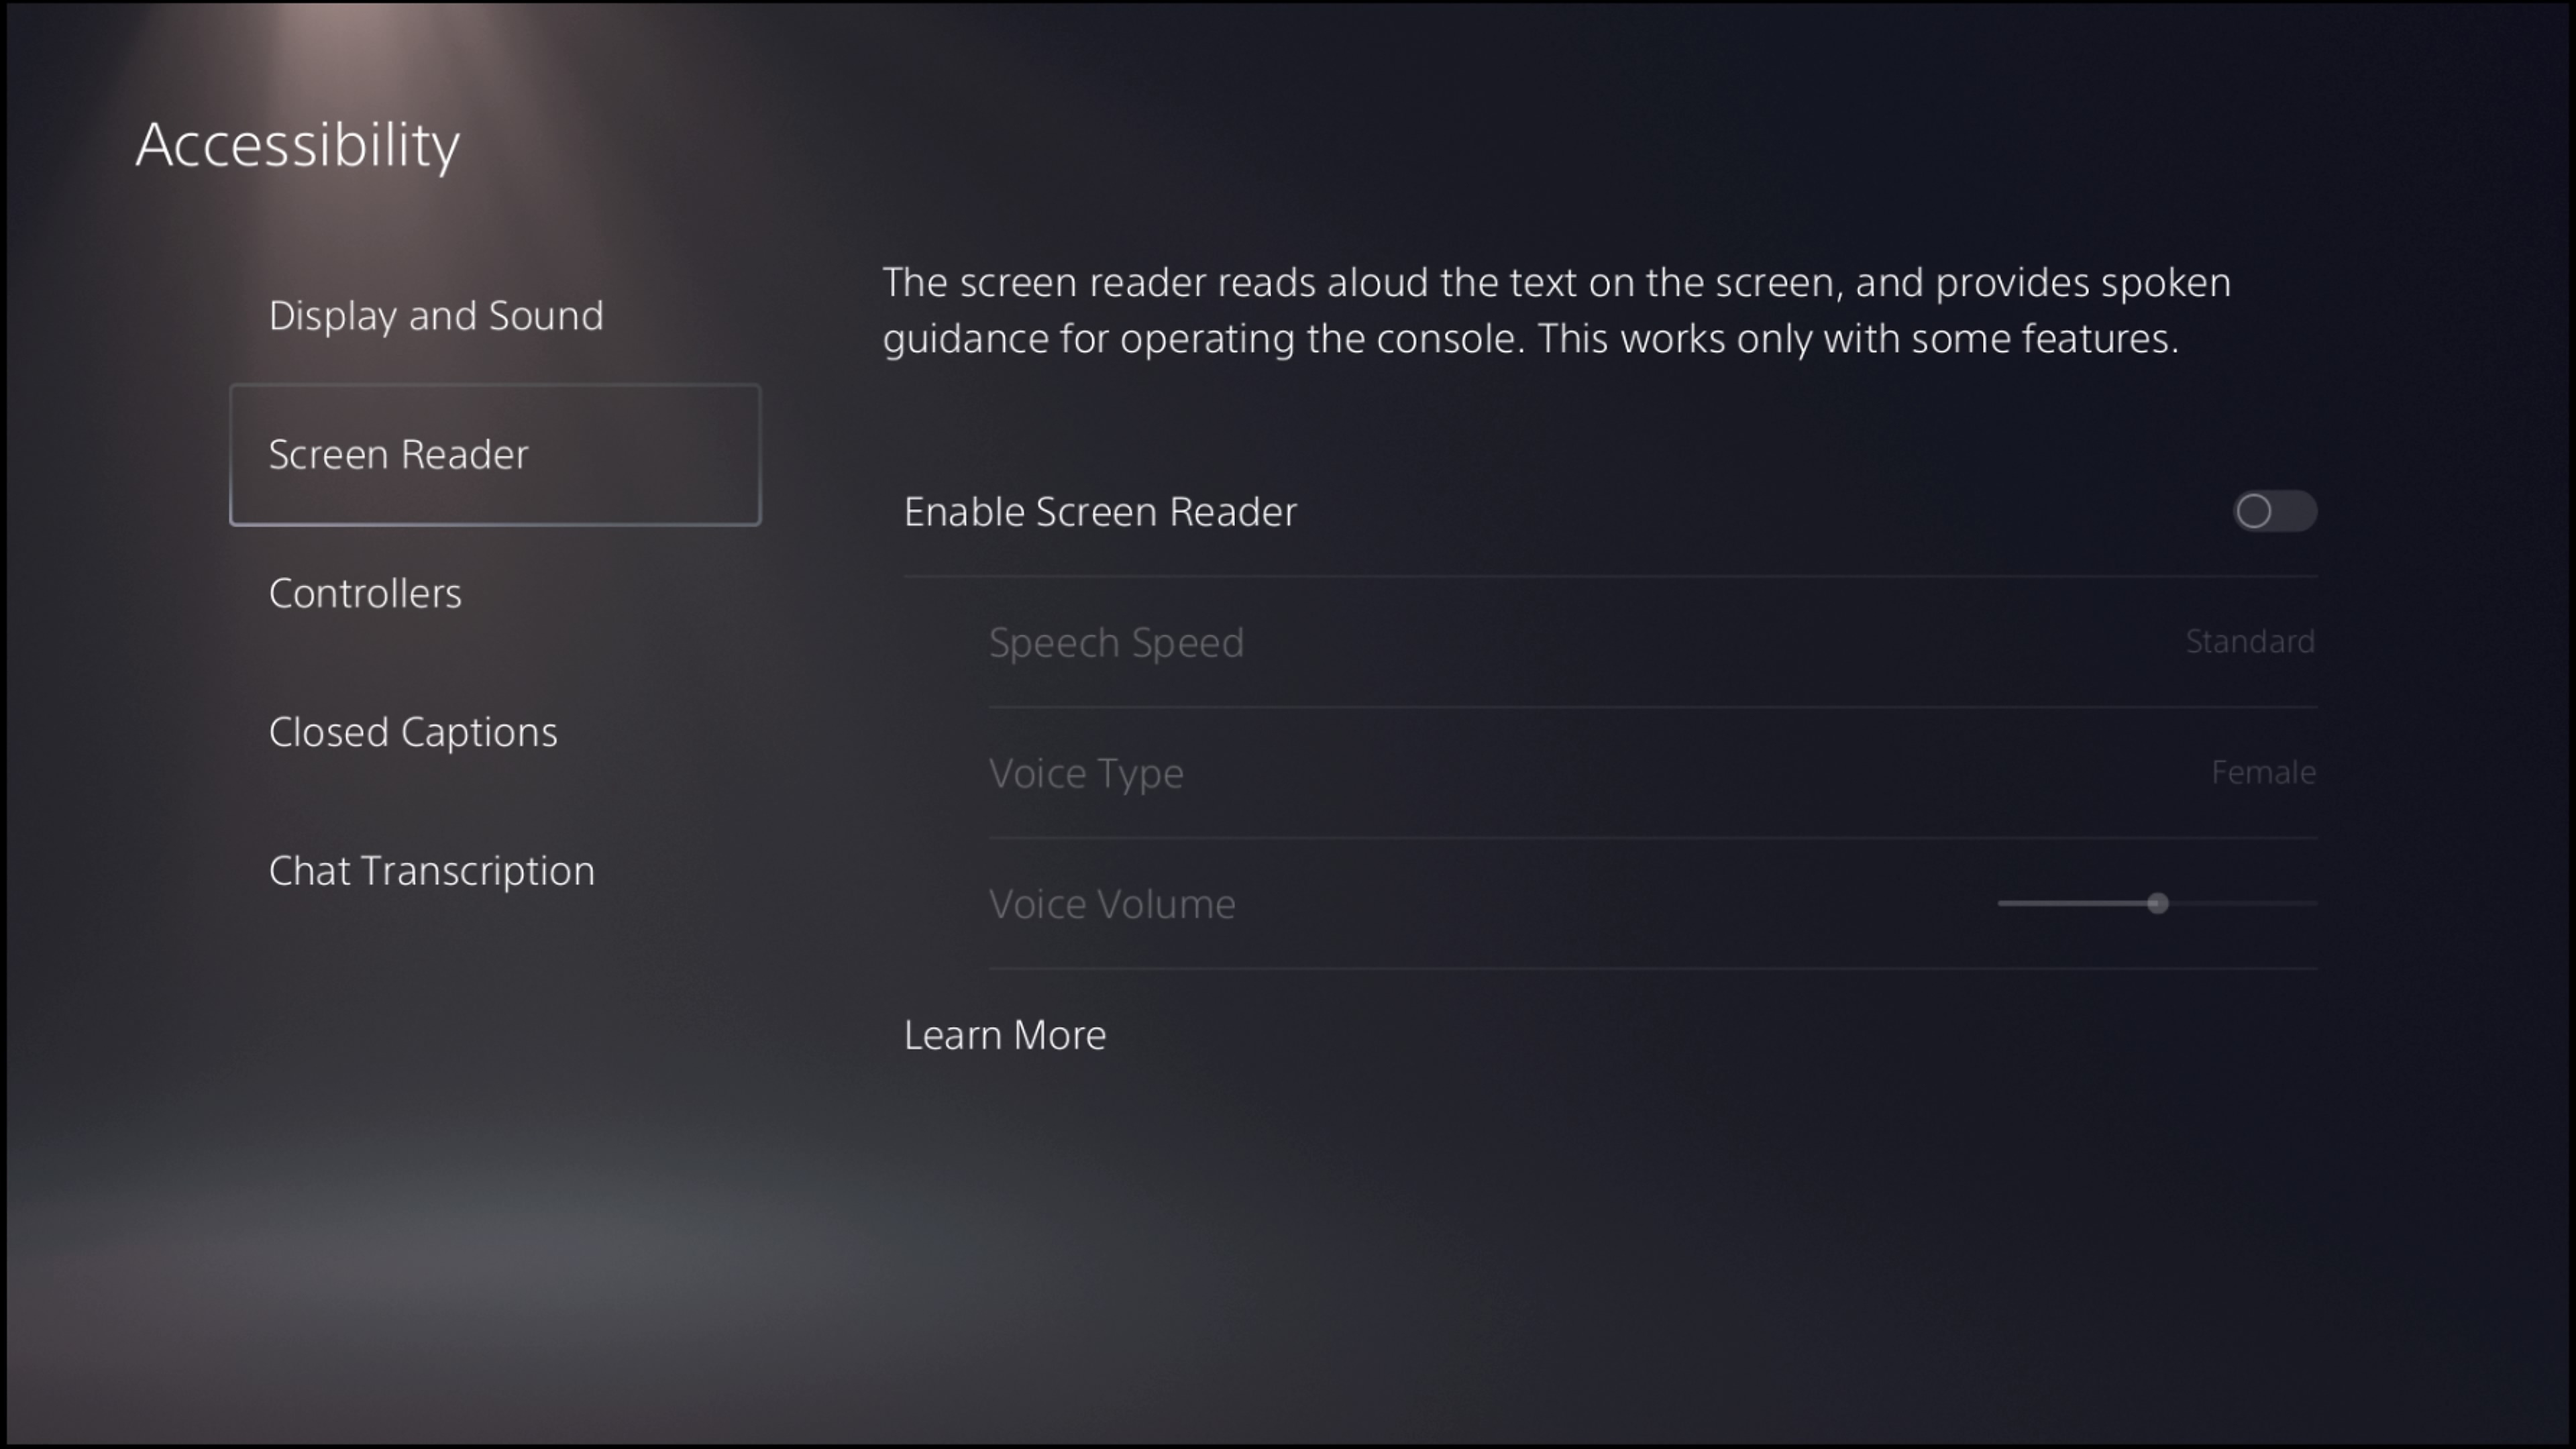 PS5 accessibility - screen reader